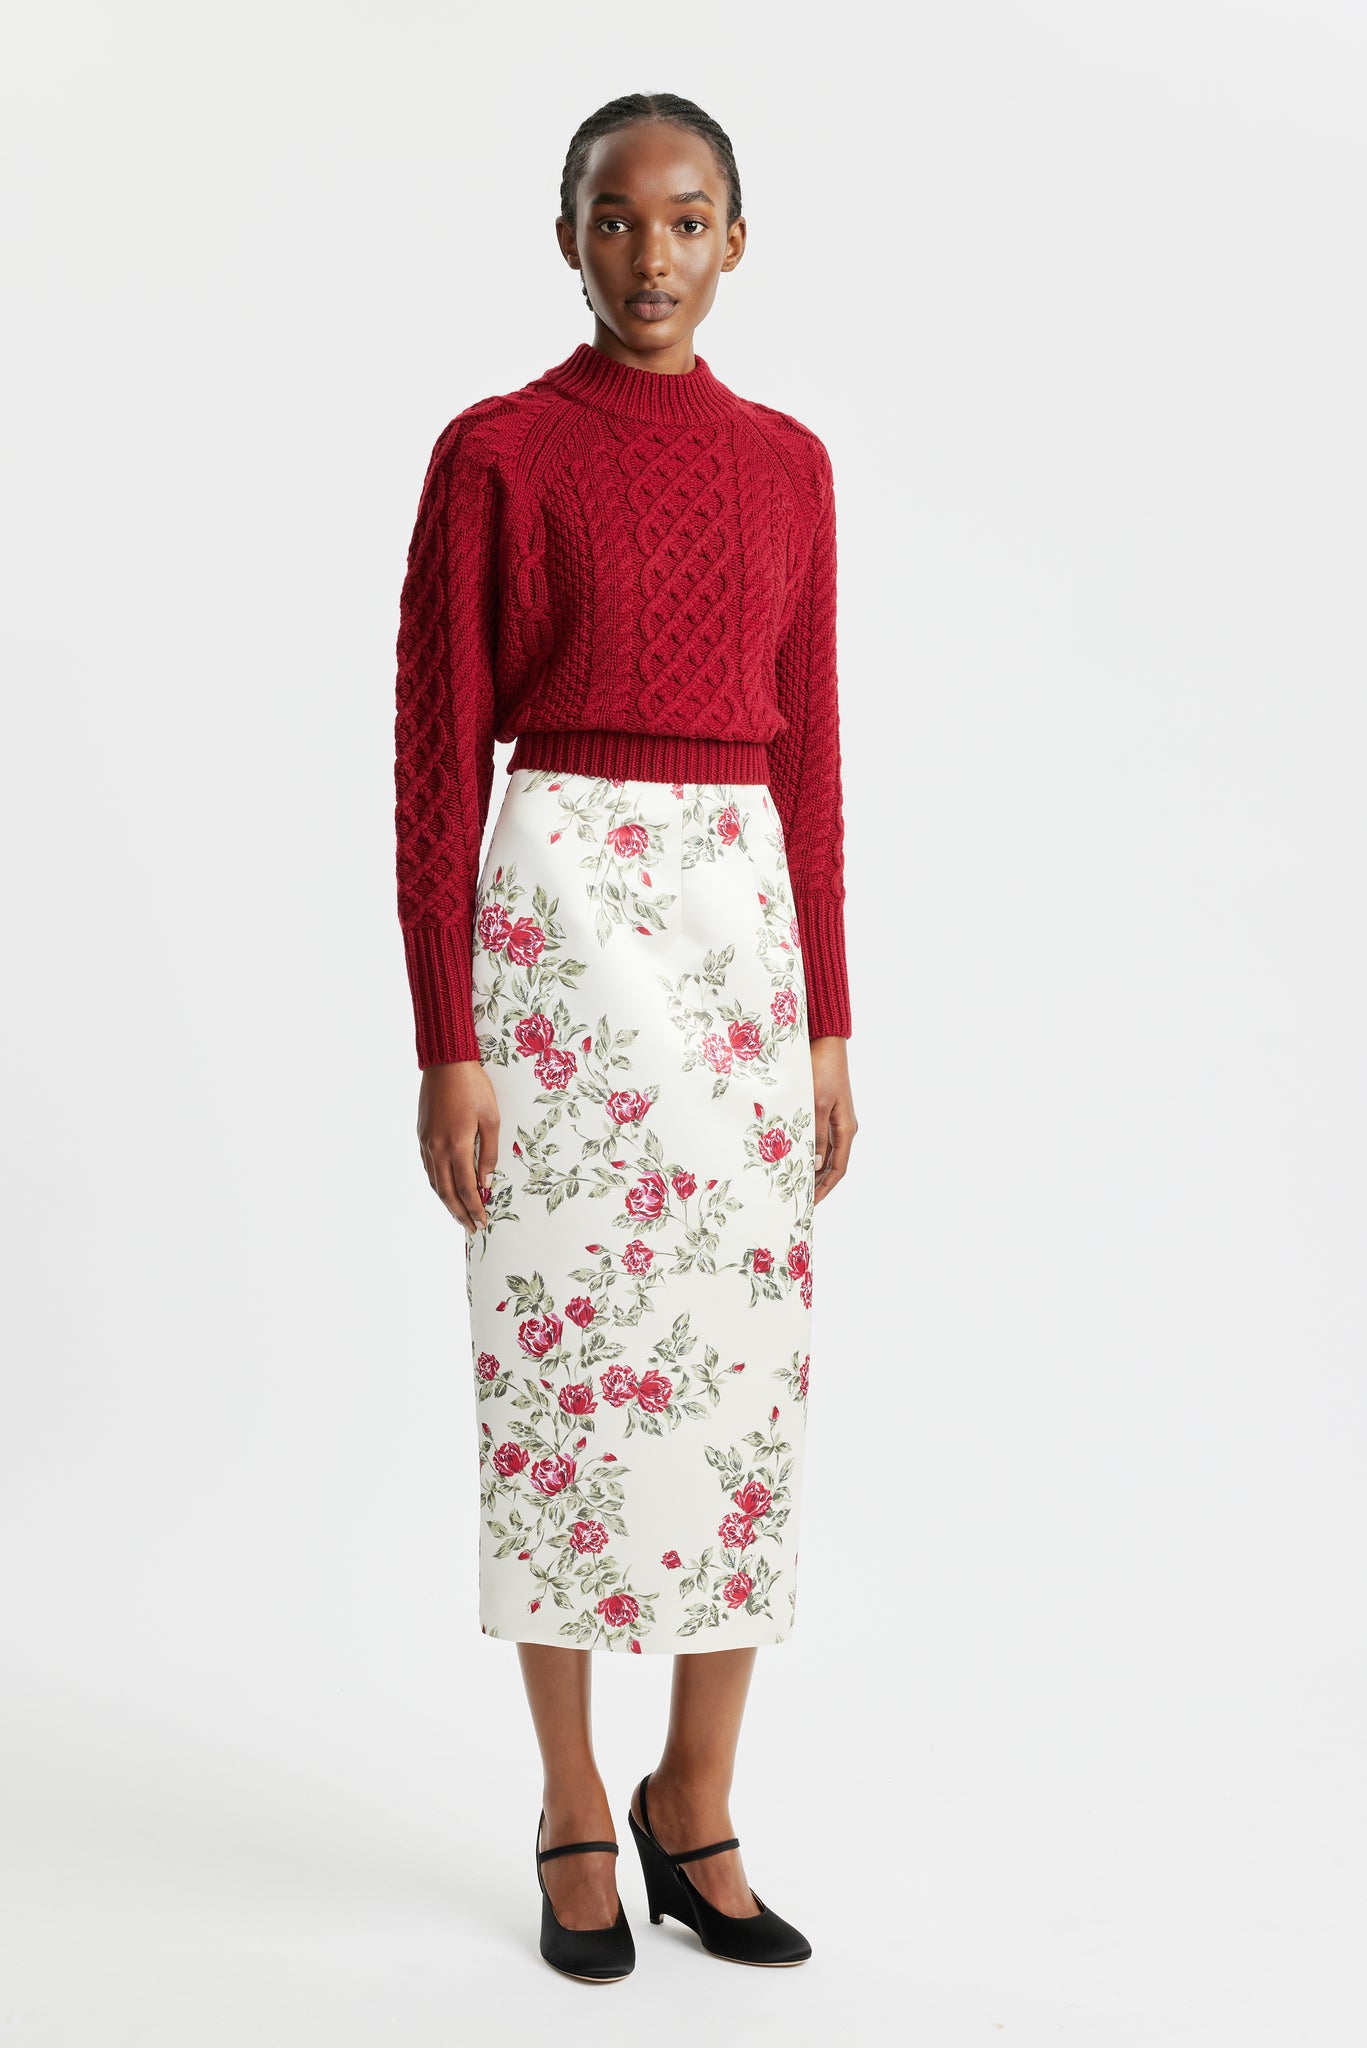 Emory Deep Red Cable Knit Jumper | Emilia Wickstead